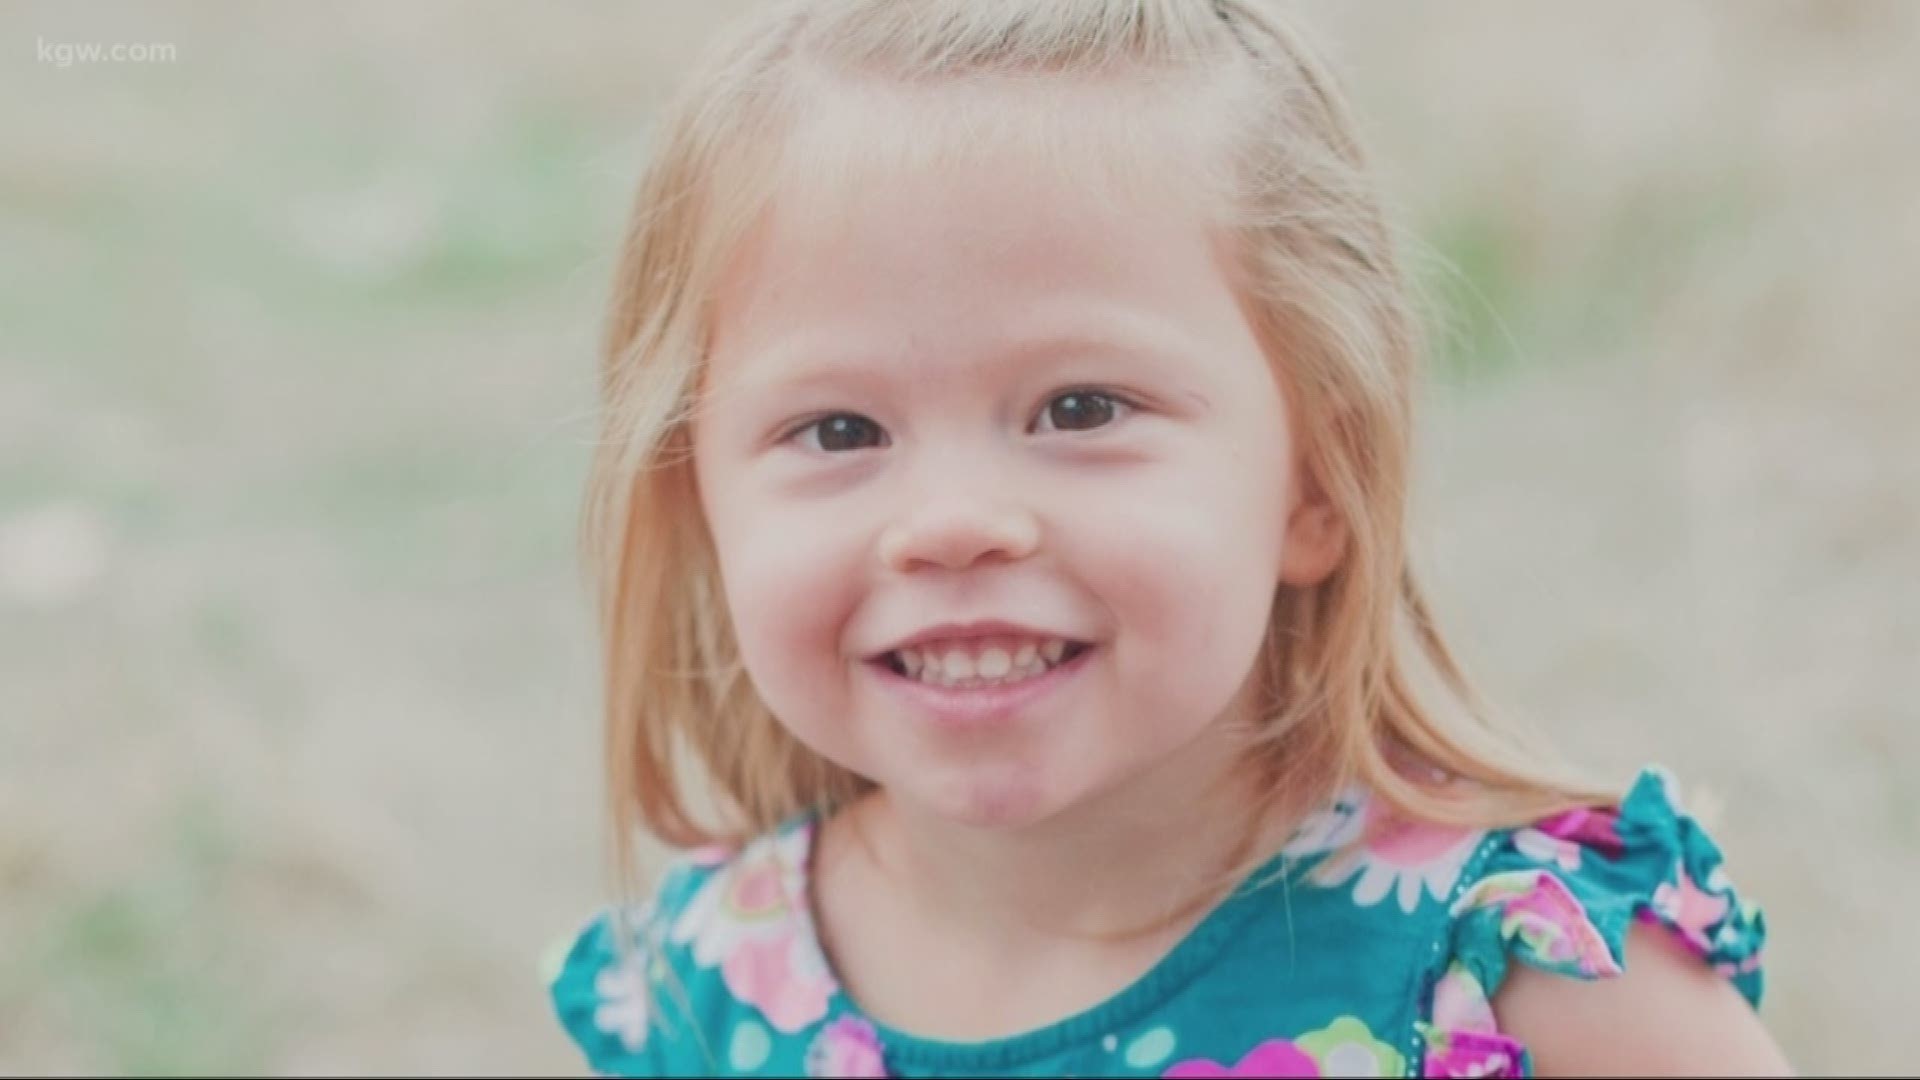 A family is asking for help after a girl was denied medical treatment.